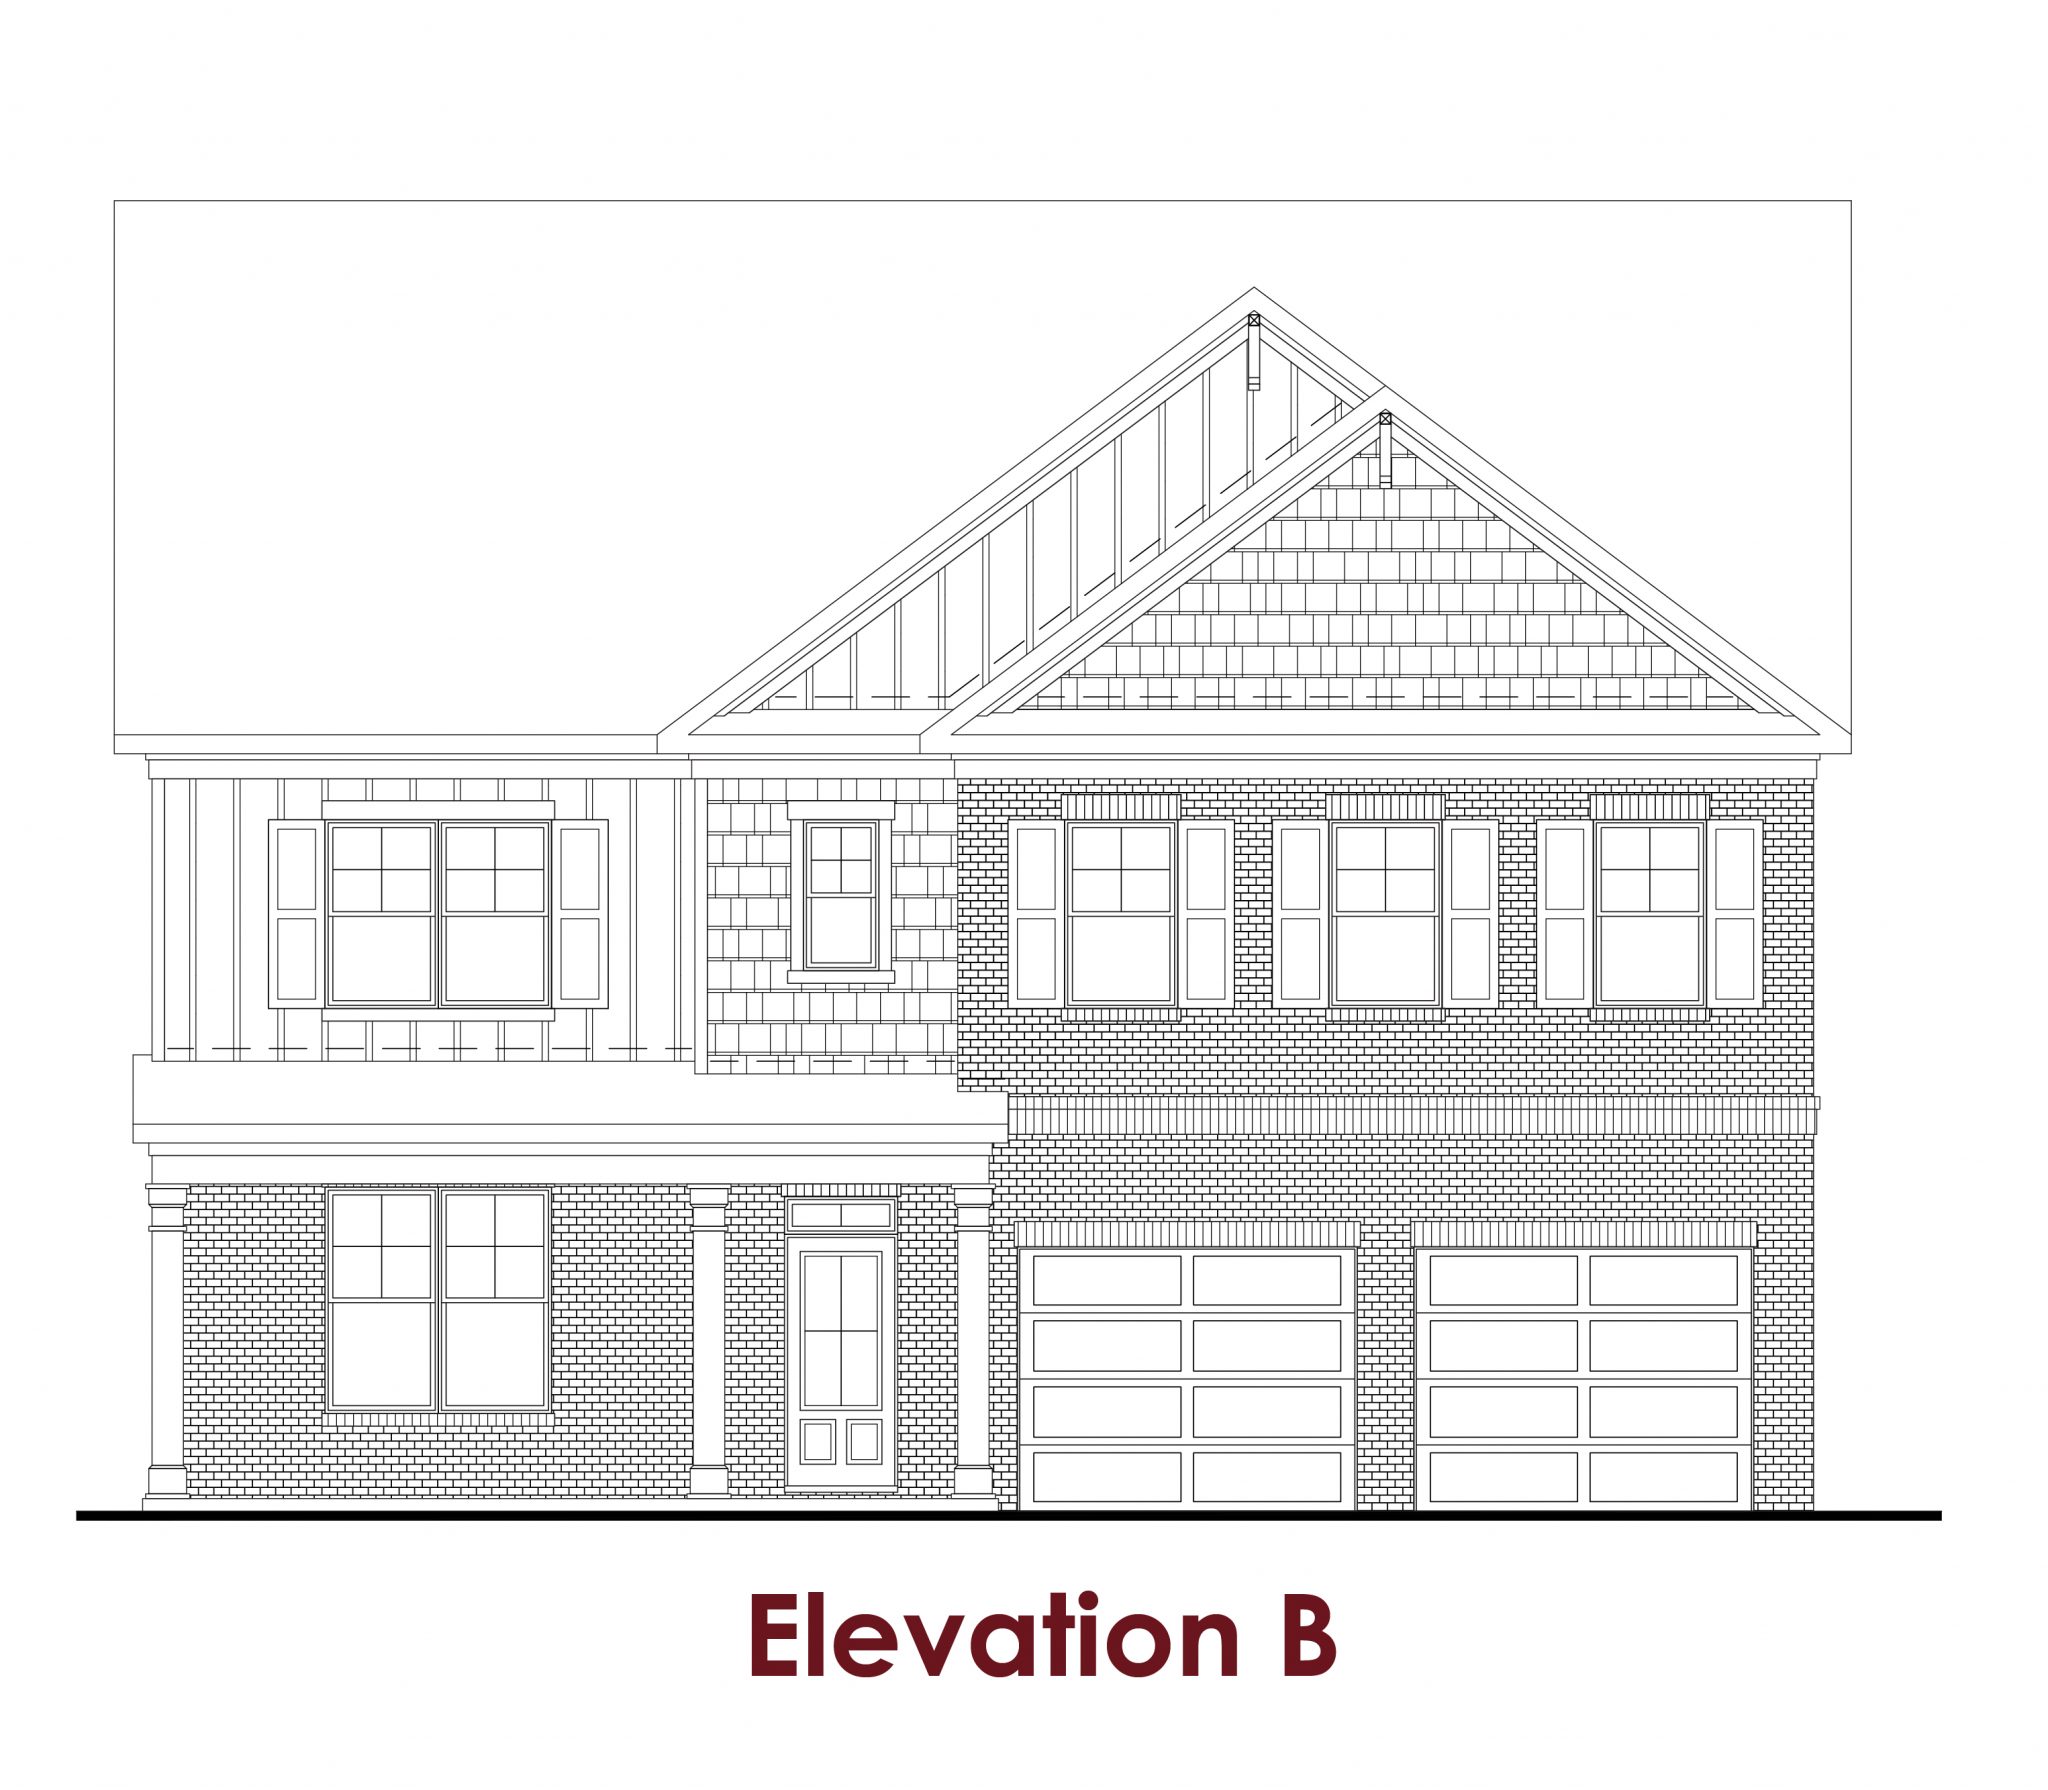 Camelot elevations Image